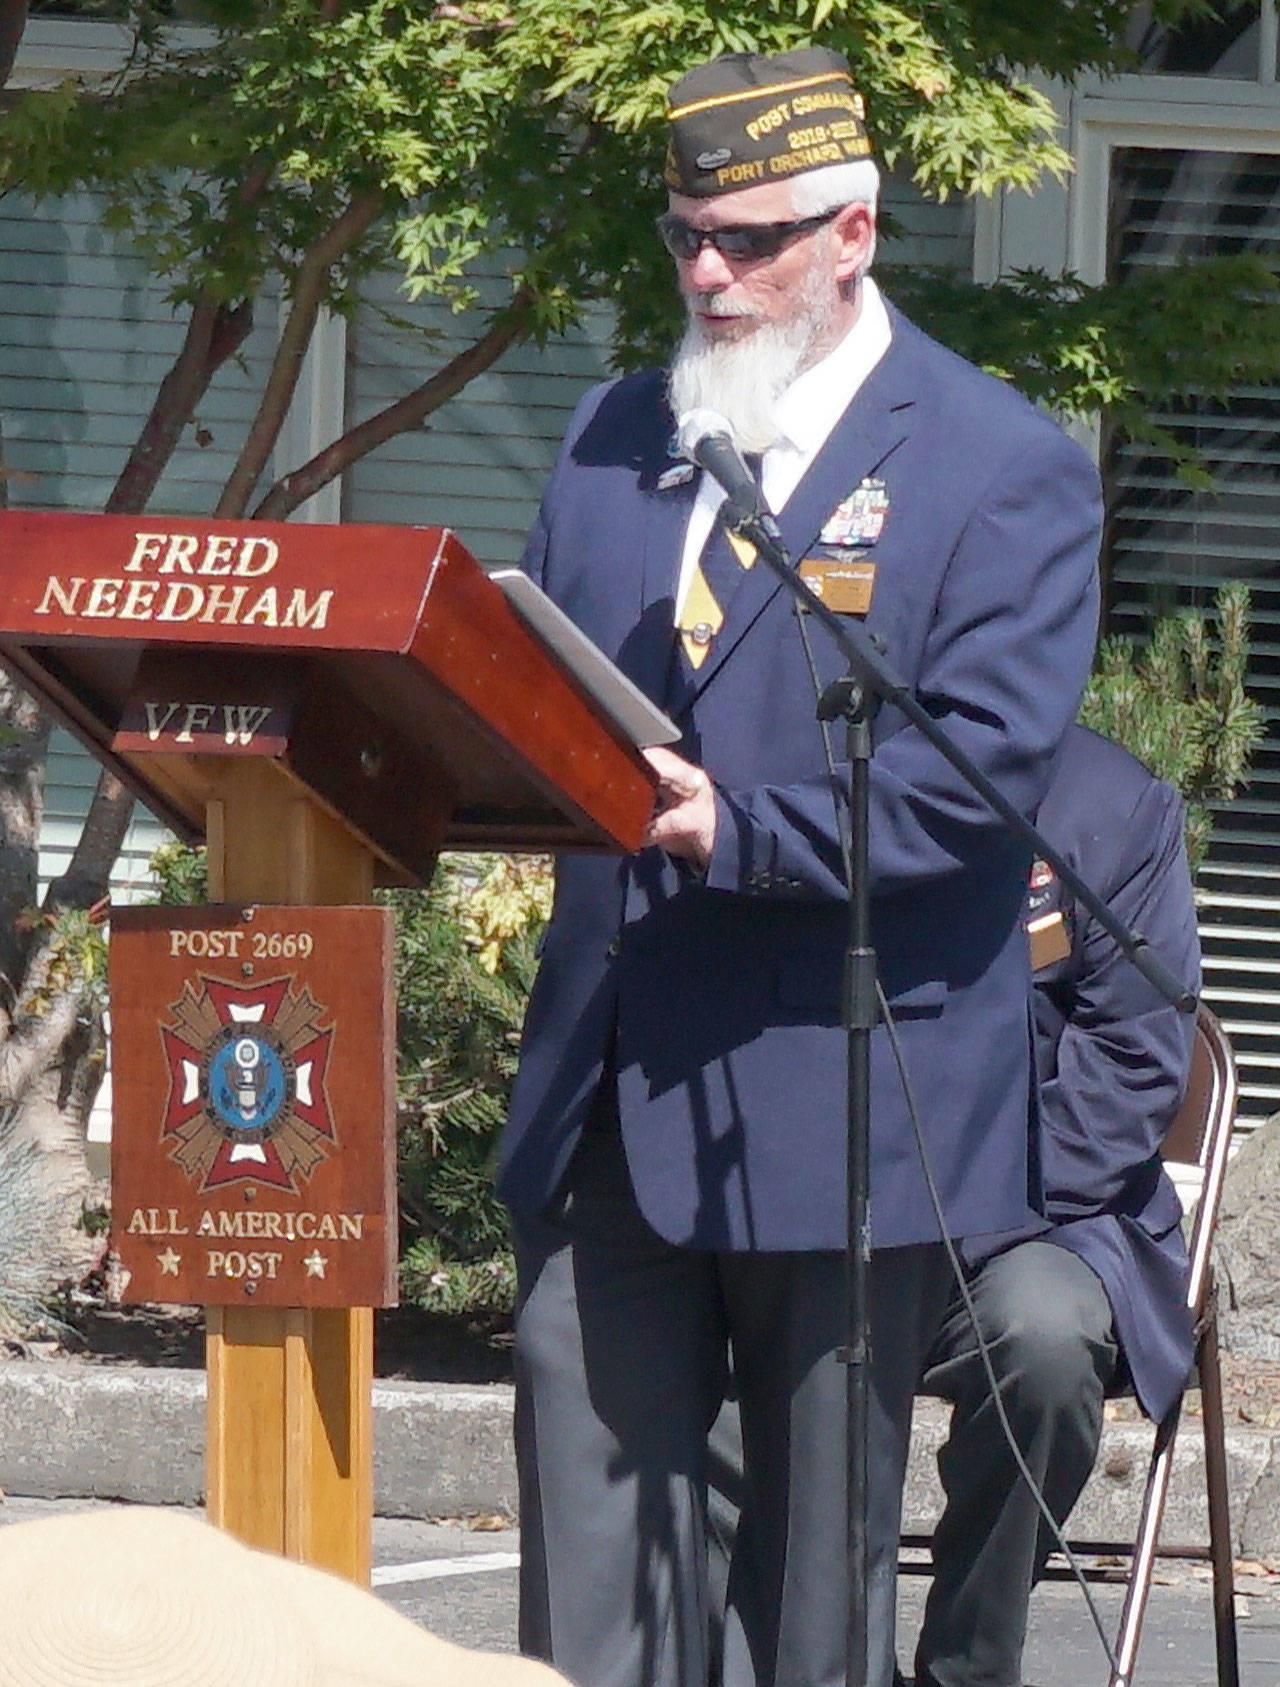 VFW Post 2669 Commander Dan Bujok delivers welcoming remarks to veterans and community members at the Manchester Veterans Memorial Observance at the Manchester Community Library on Memorial Day. (Bob Smith | Kitsap Daily News)